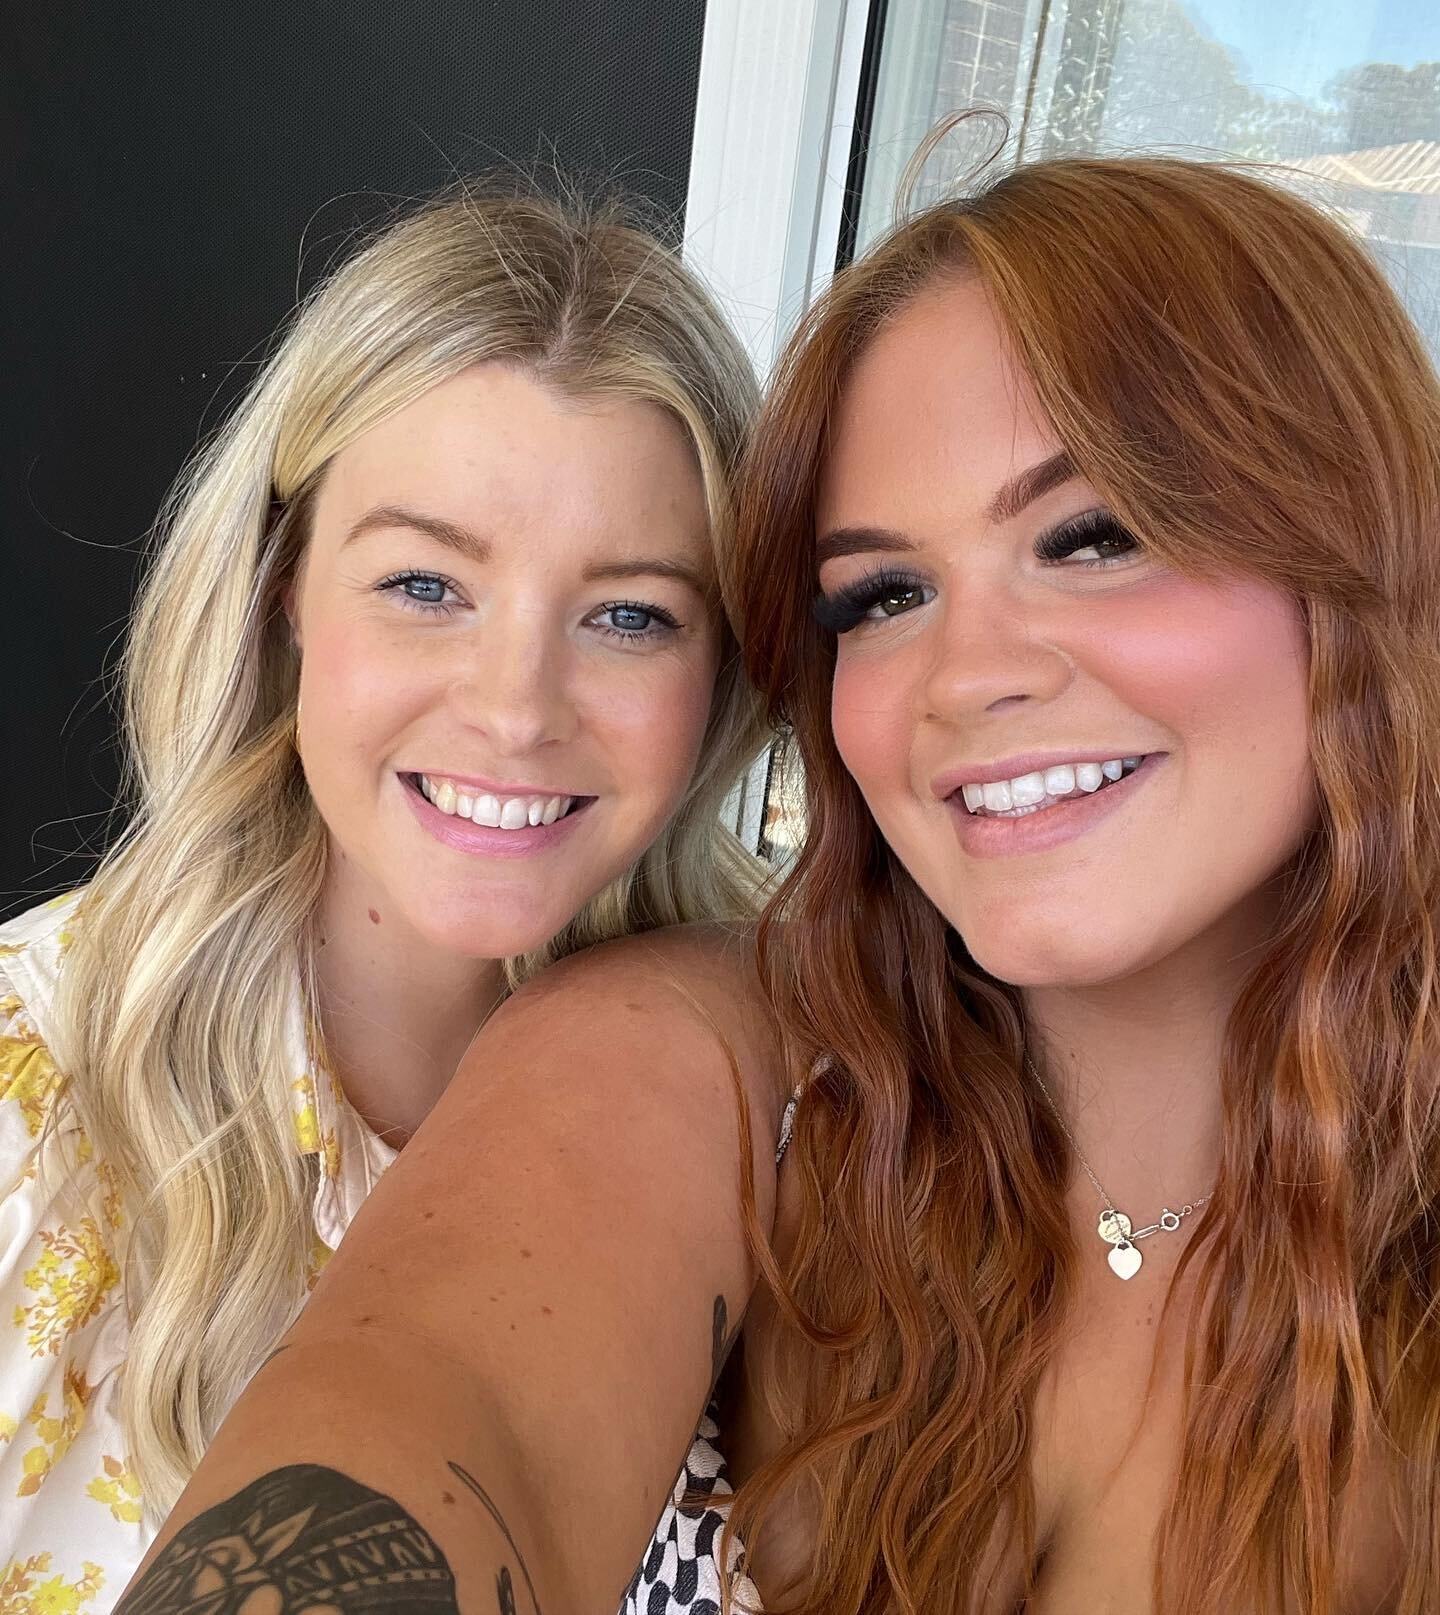 Jem and Aimee smiling their way through Friday-eve 🌼🌸🌺